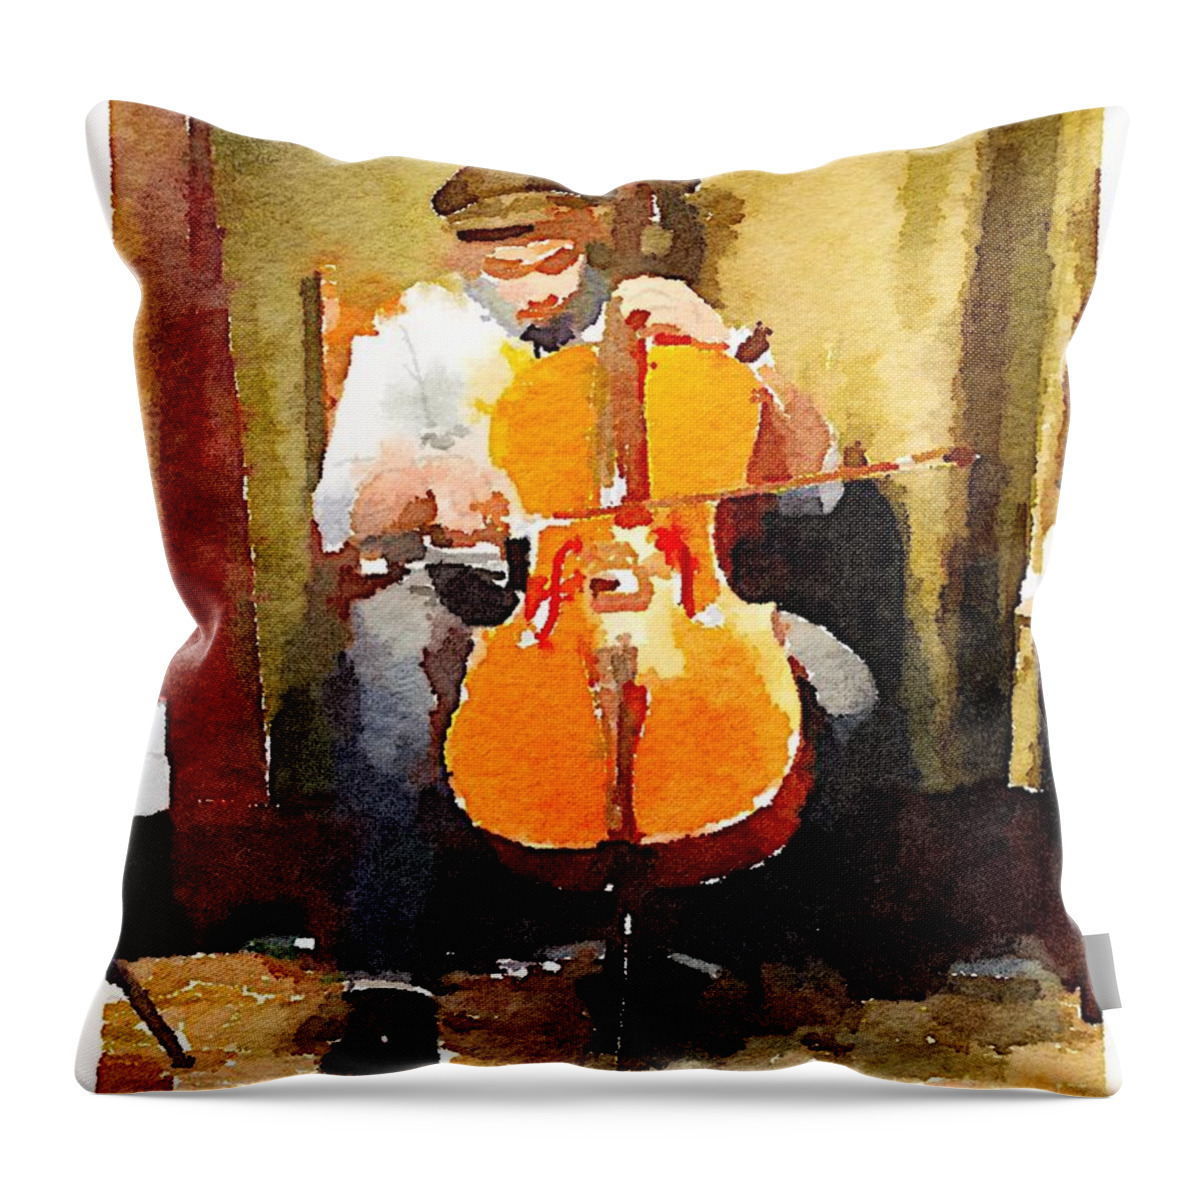 Waterlogue Throw Pillow featuring the digital art Release by Shannon Grissom